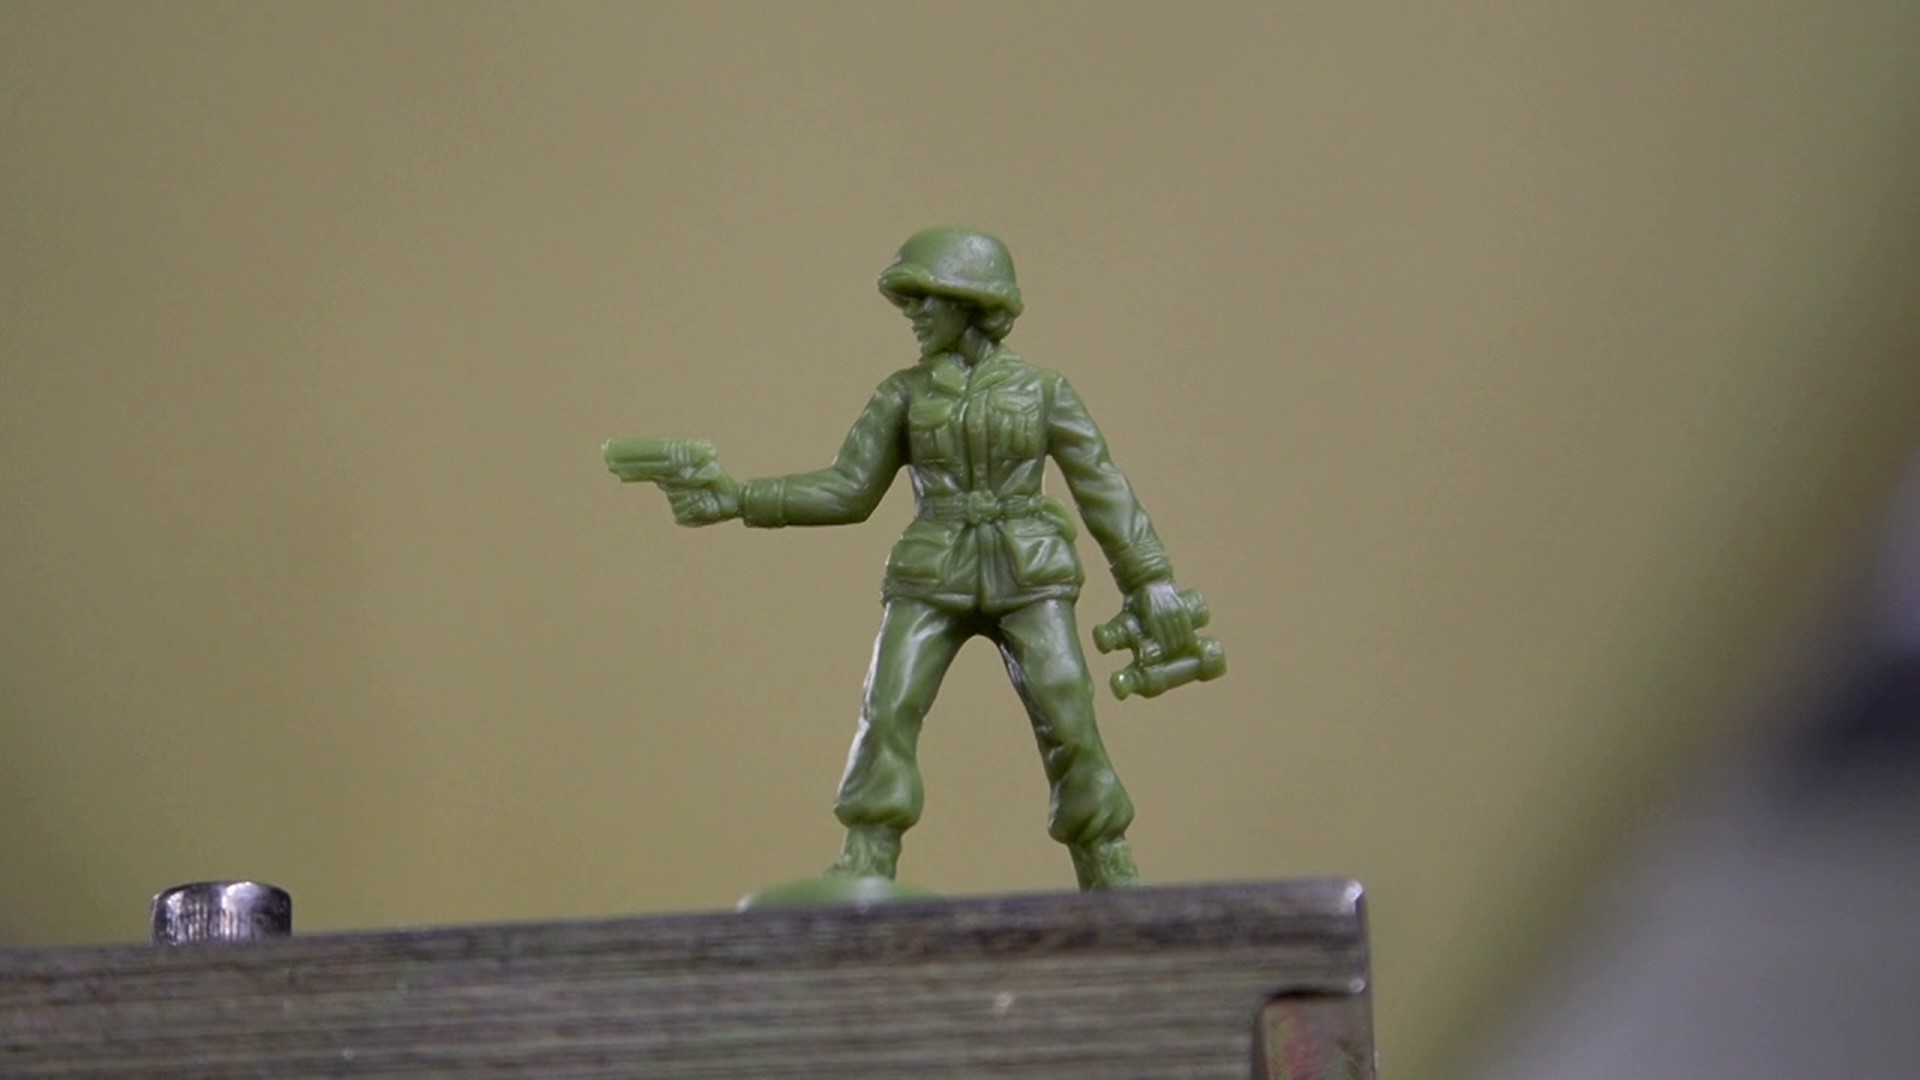 A Scranton toy manufacturer is fulfilling orders for female figurines that made national news.